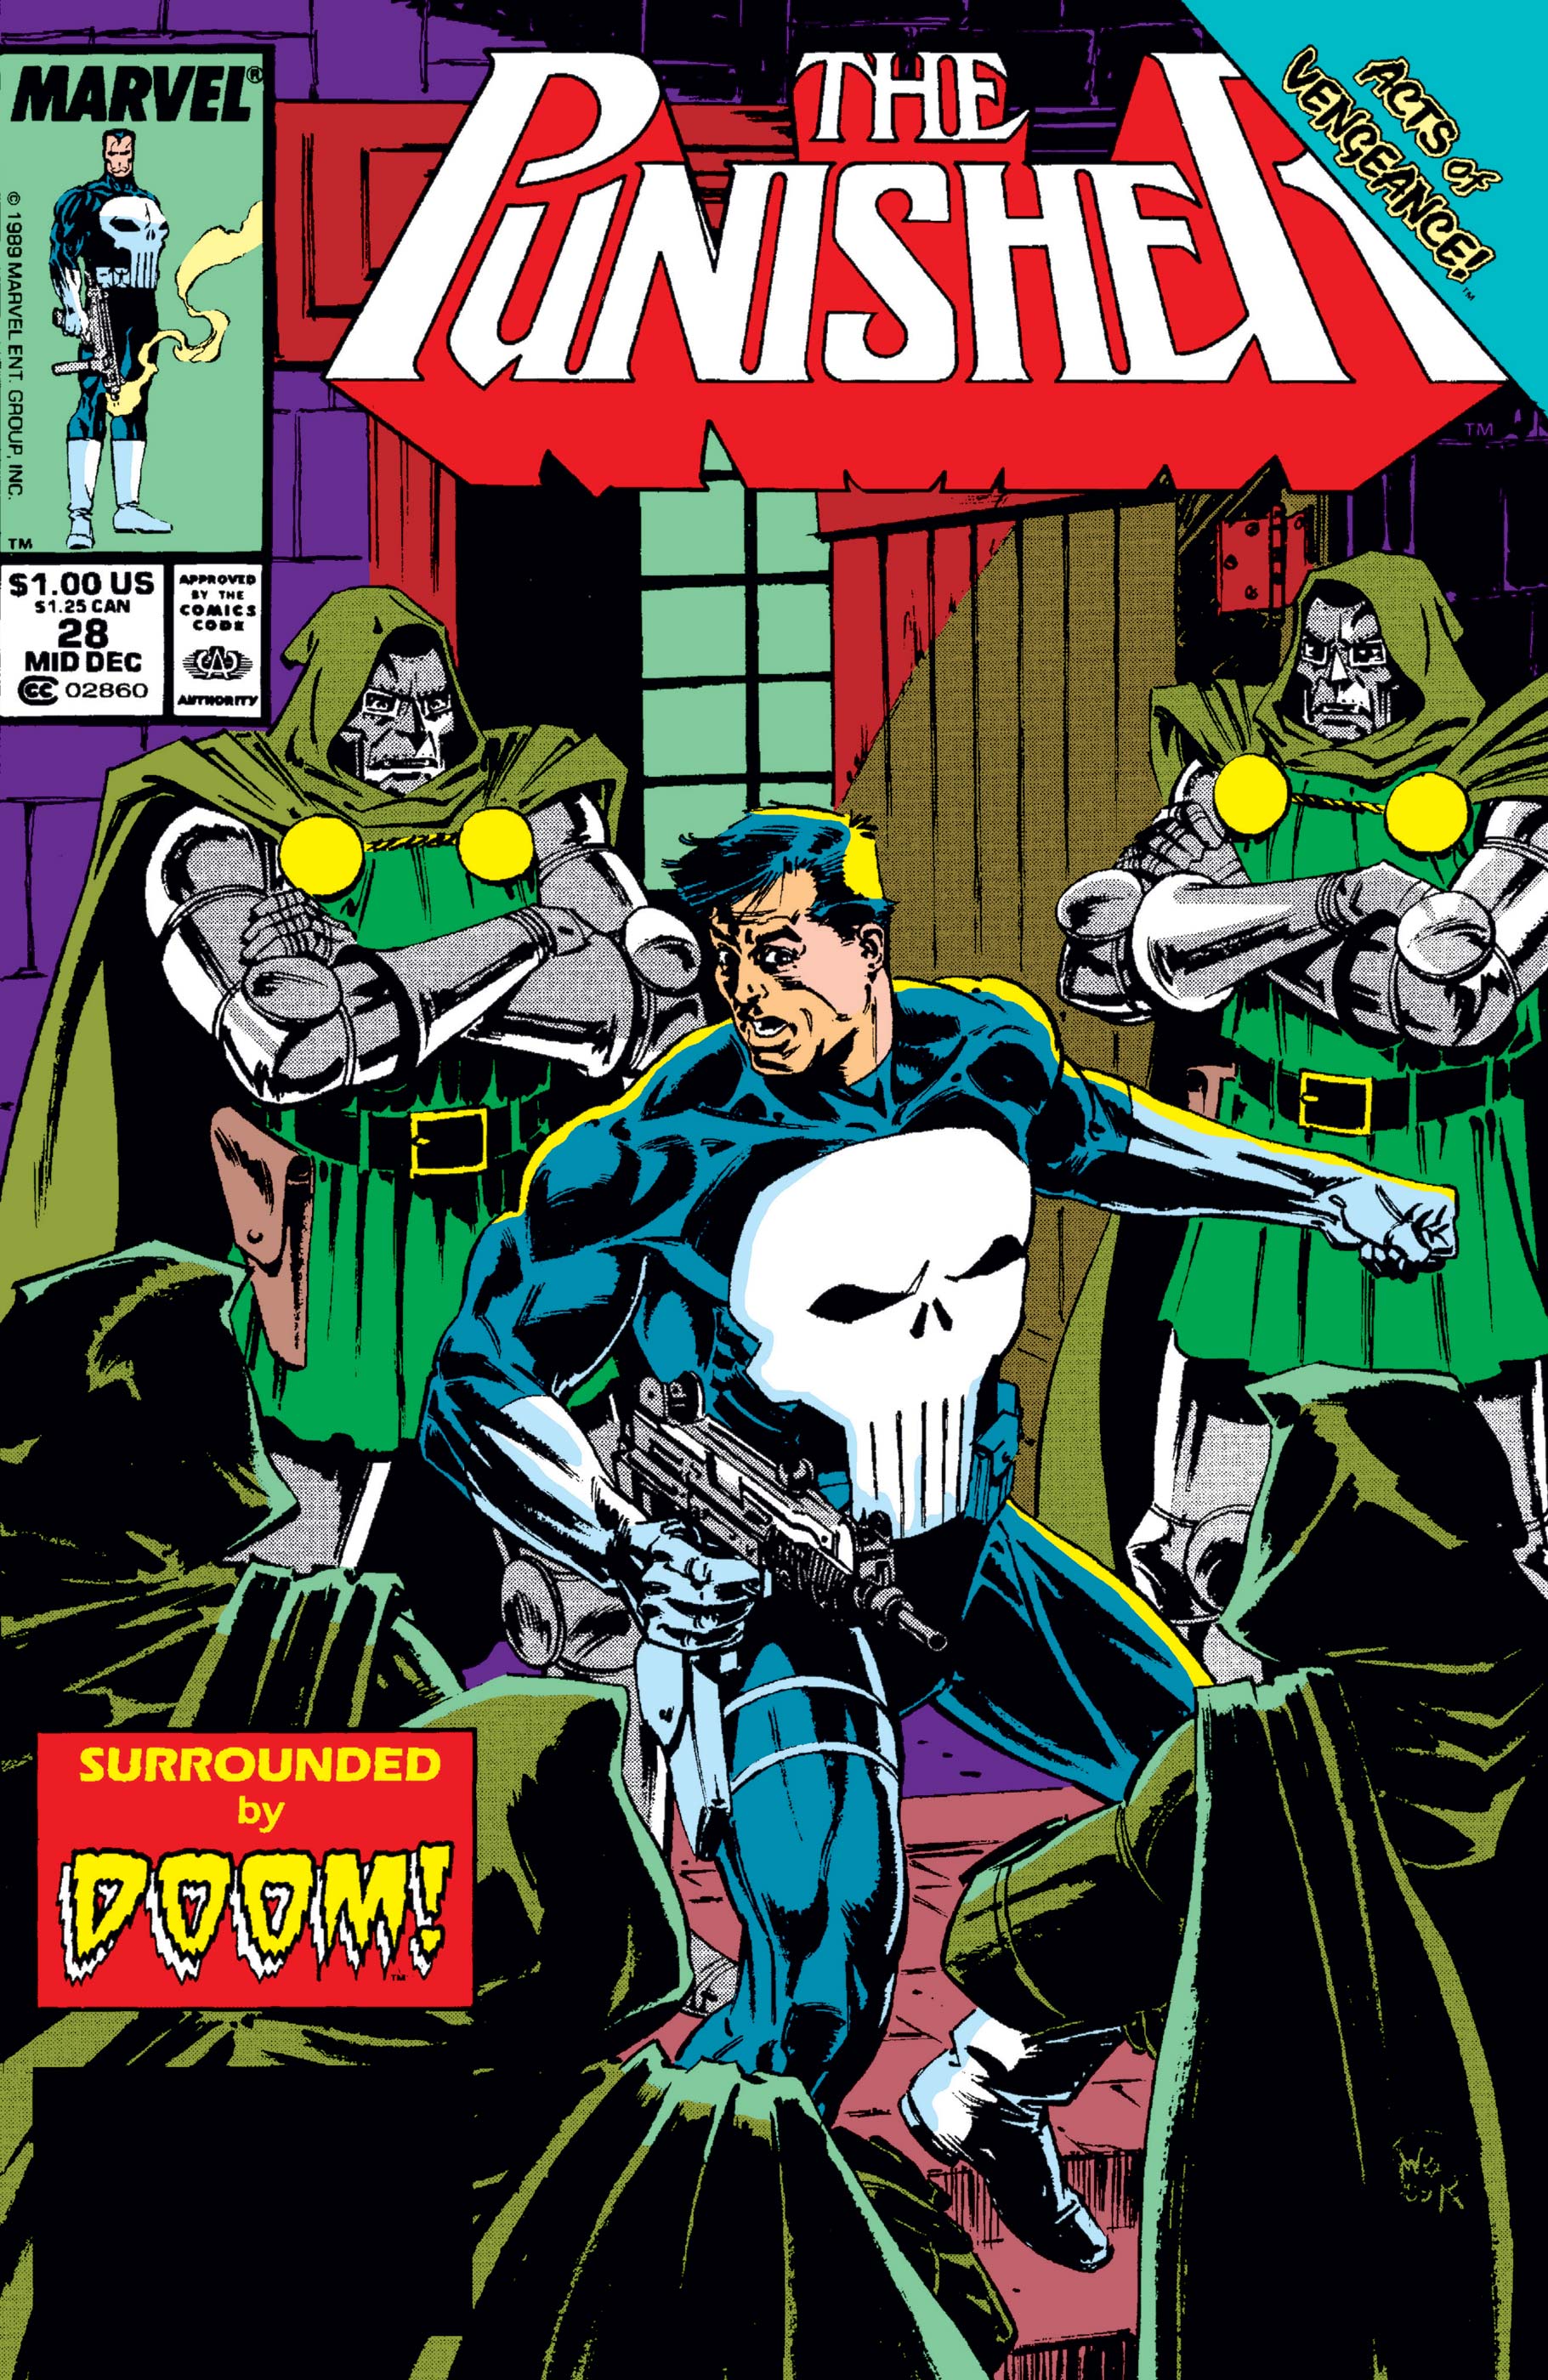 The Punisher (1987) #28